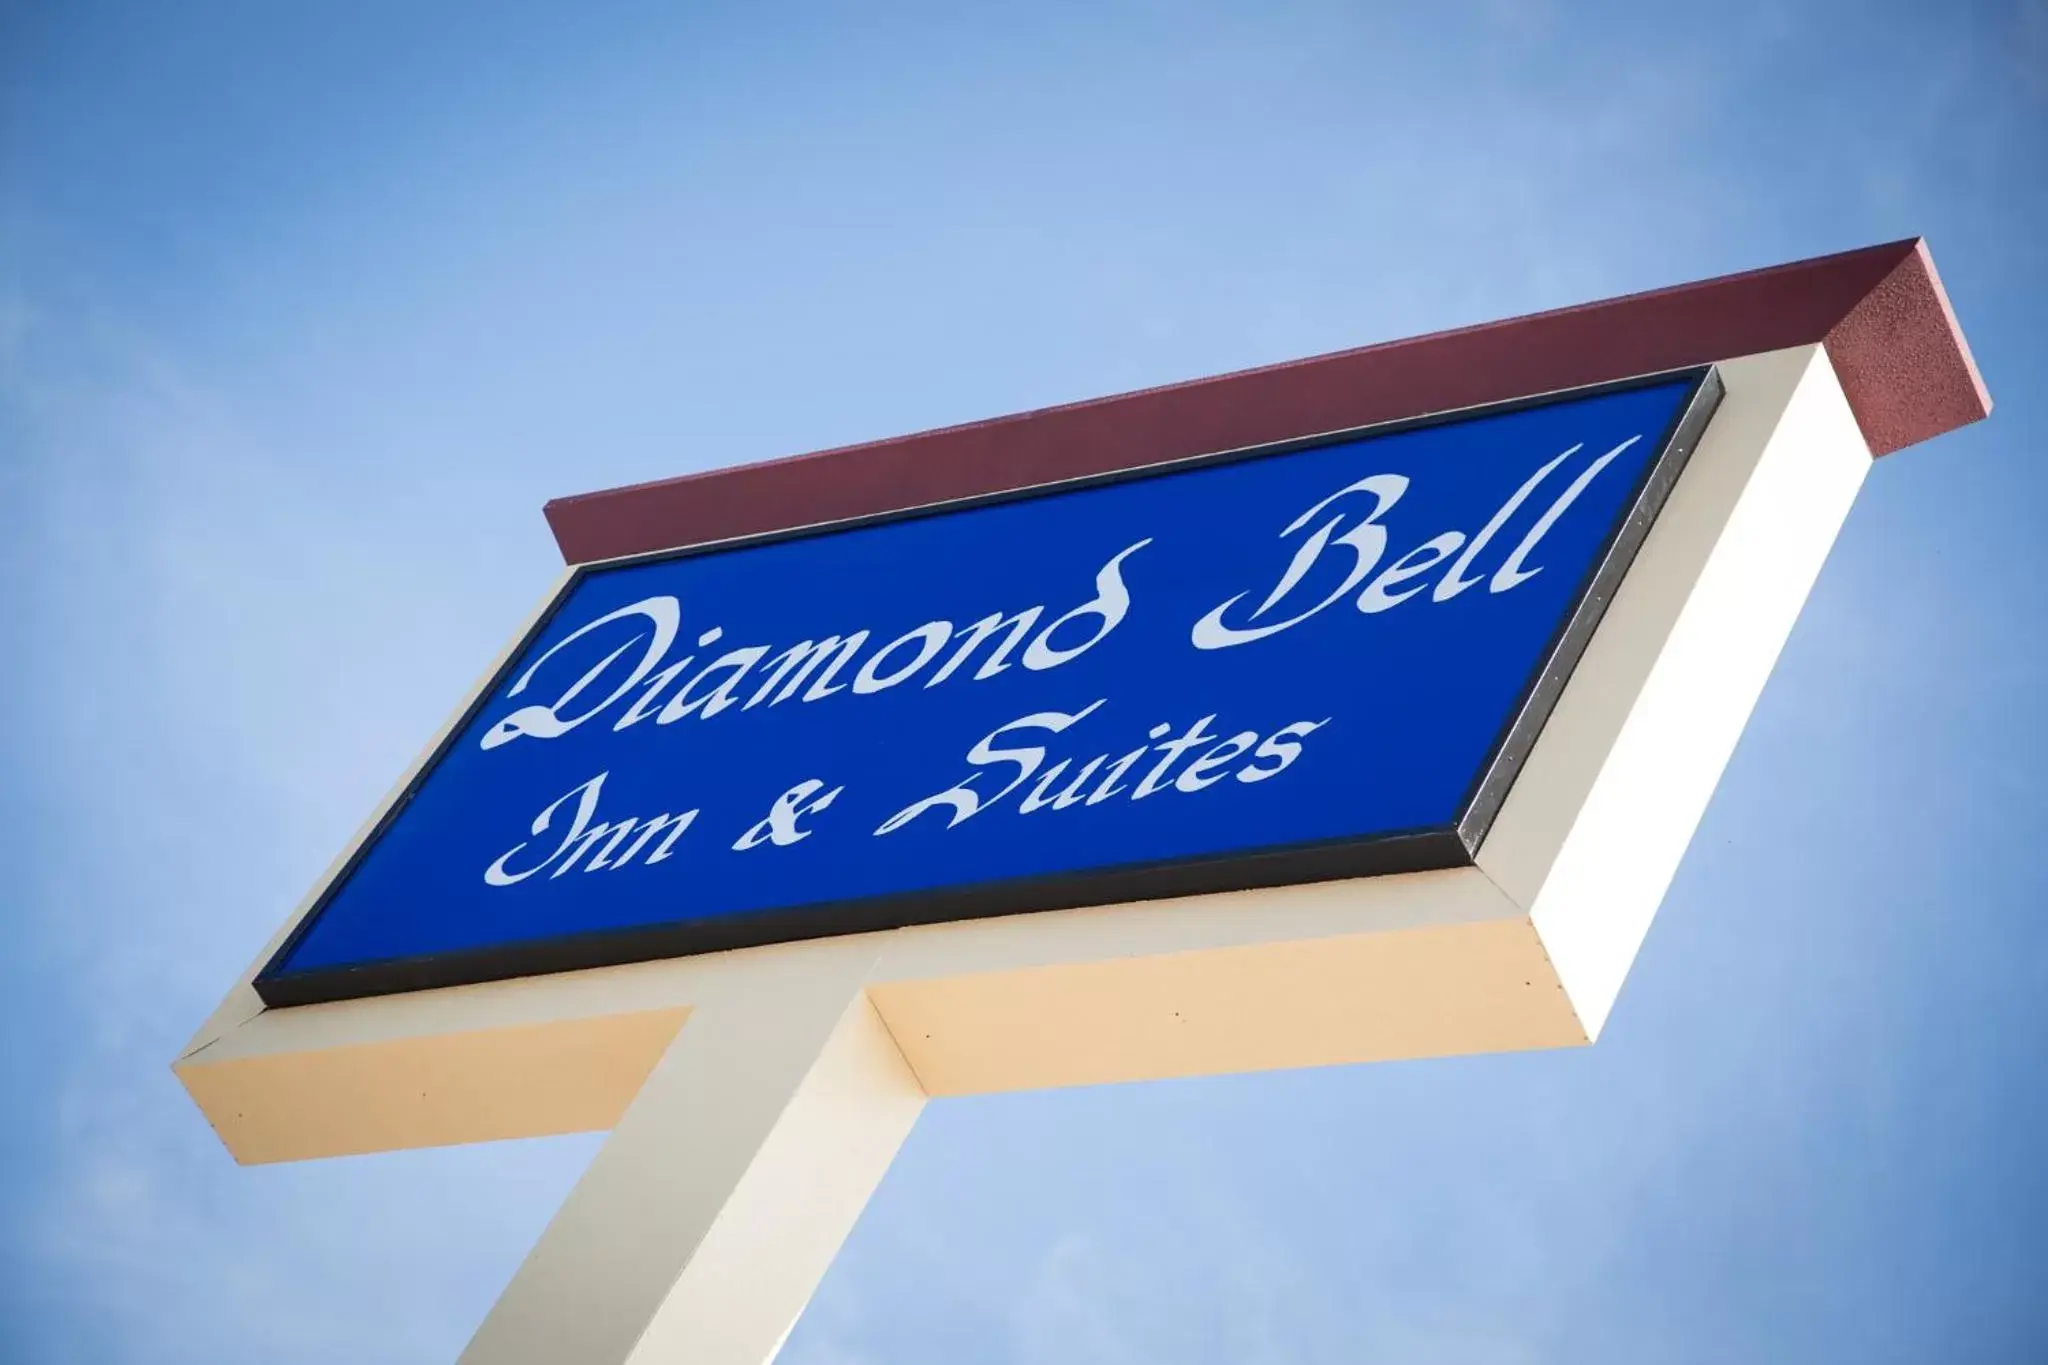 Property logo or sign in Diamond Bell Inn & Suites